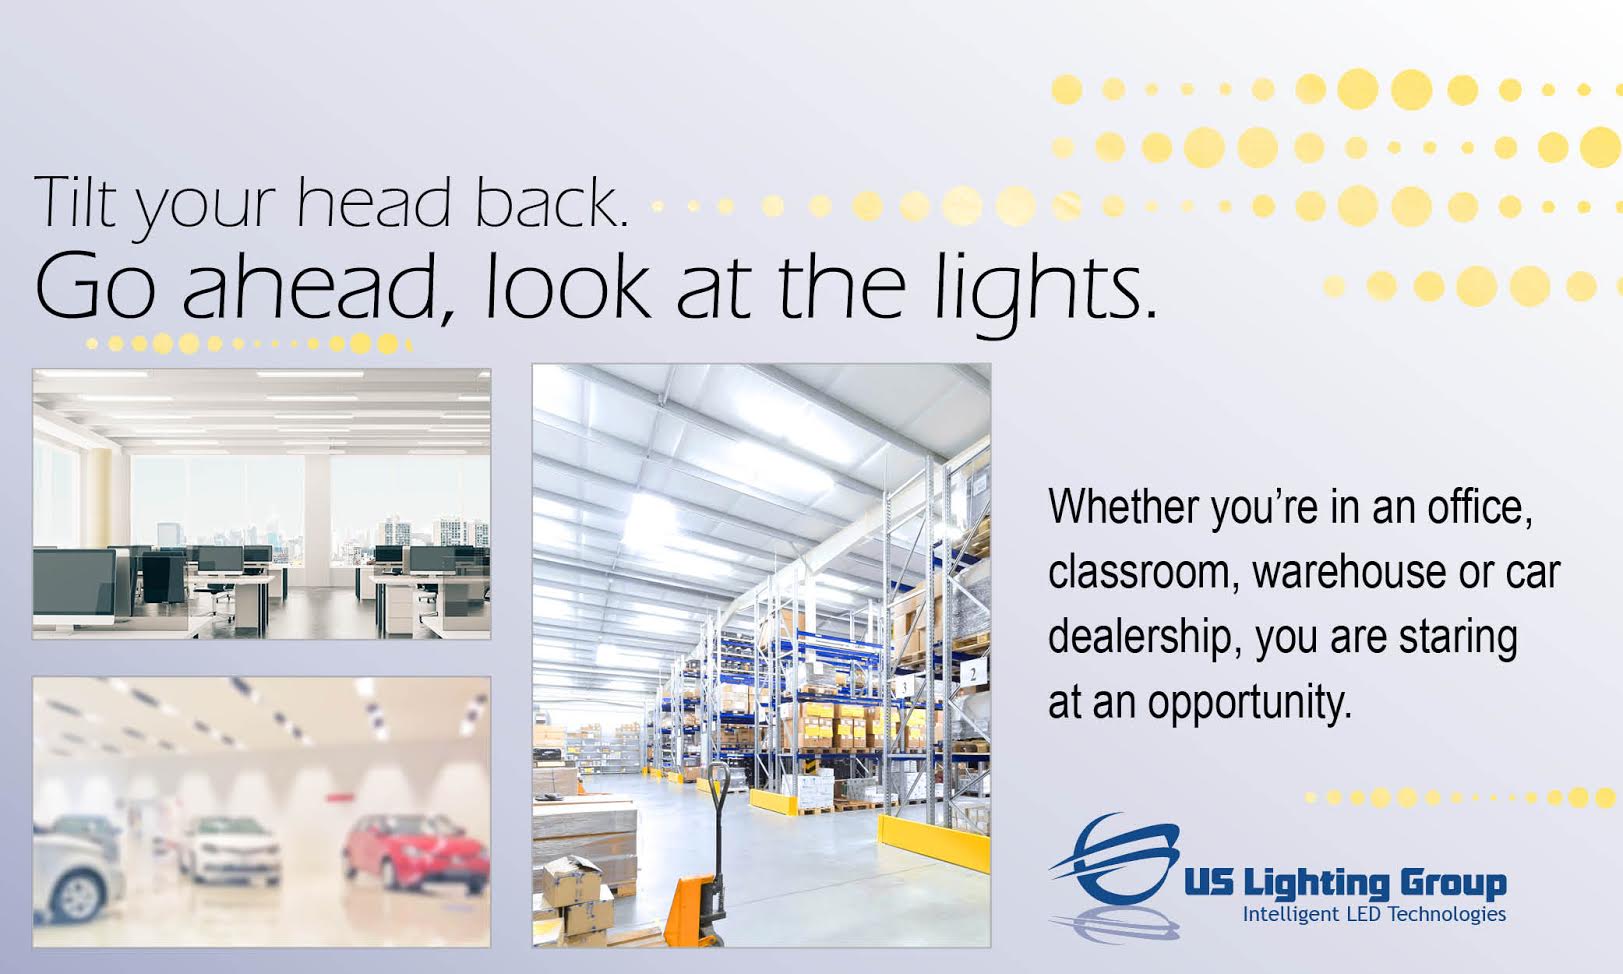 US Lighting Group Business Opportunity